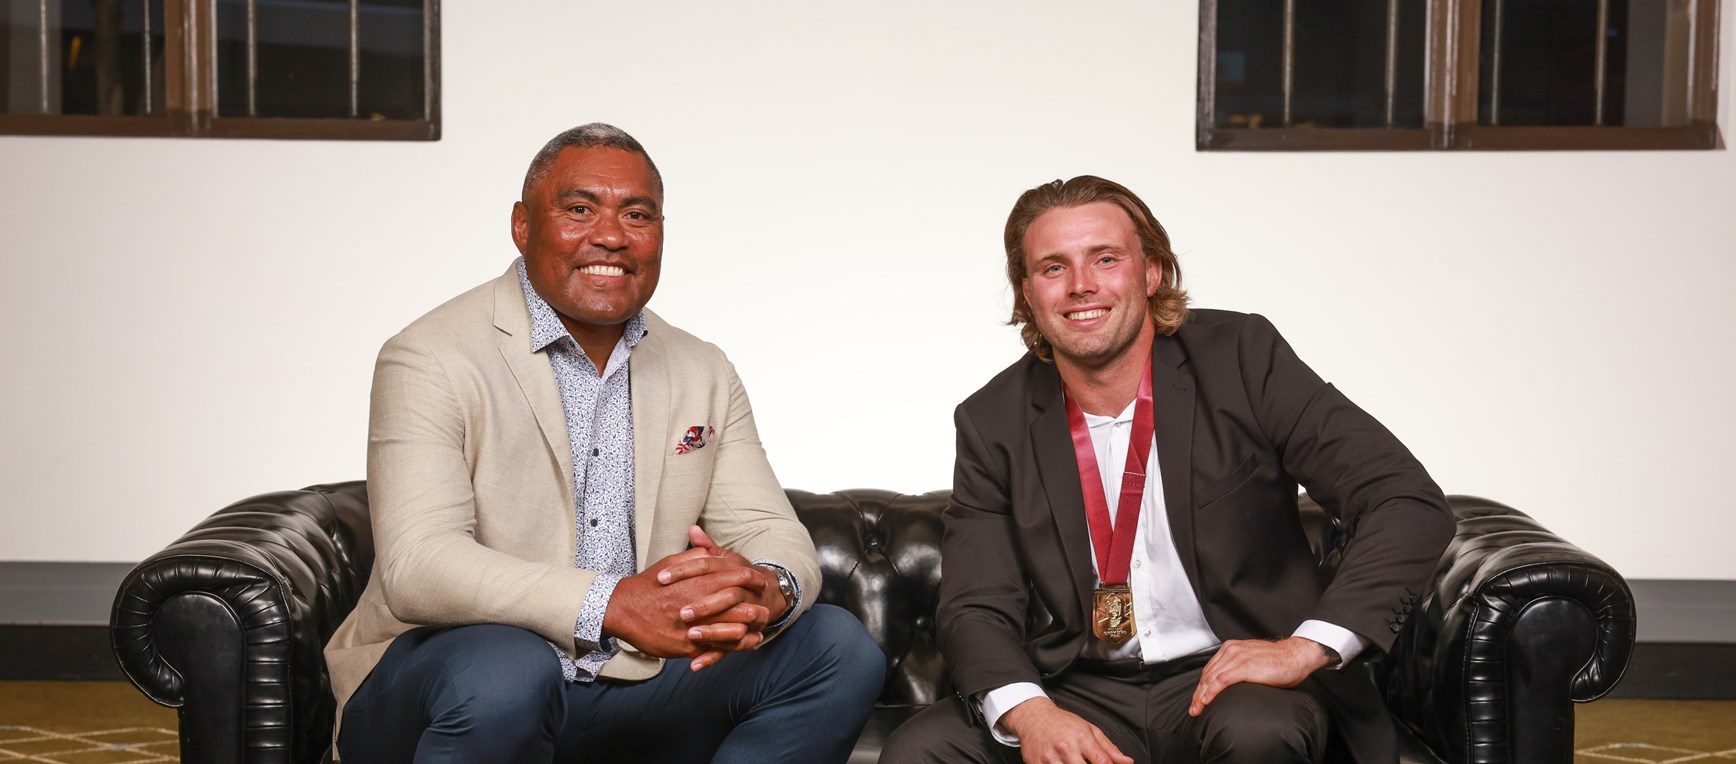 In pictures: QRL award winners